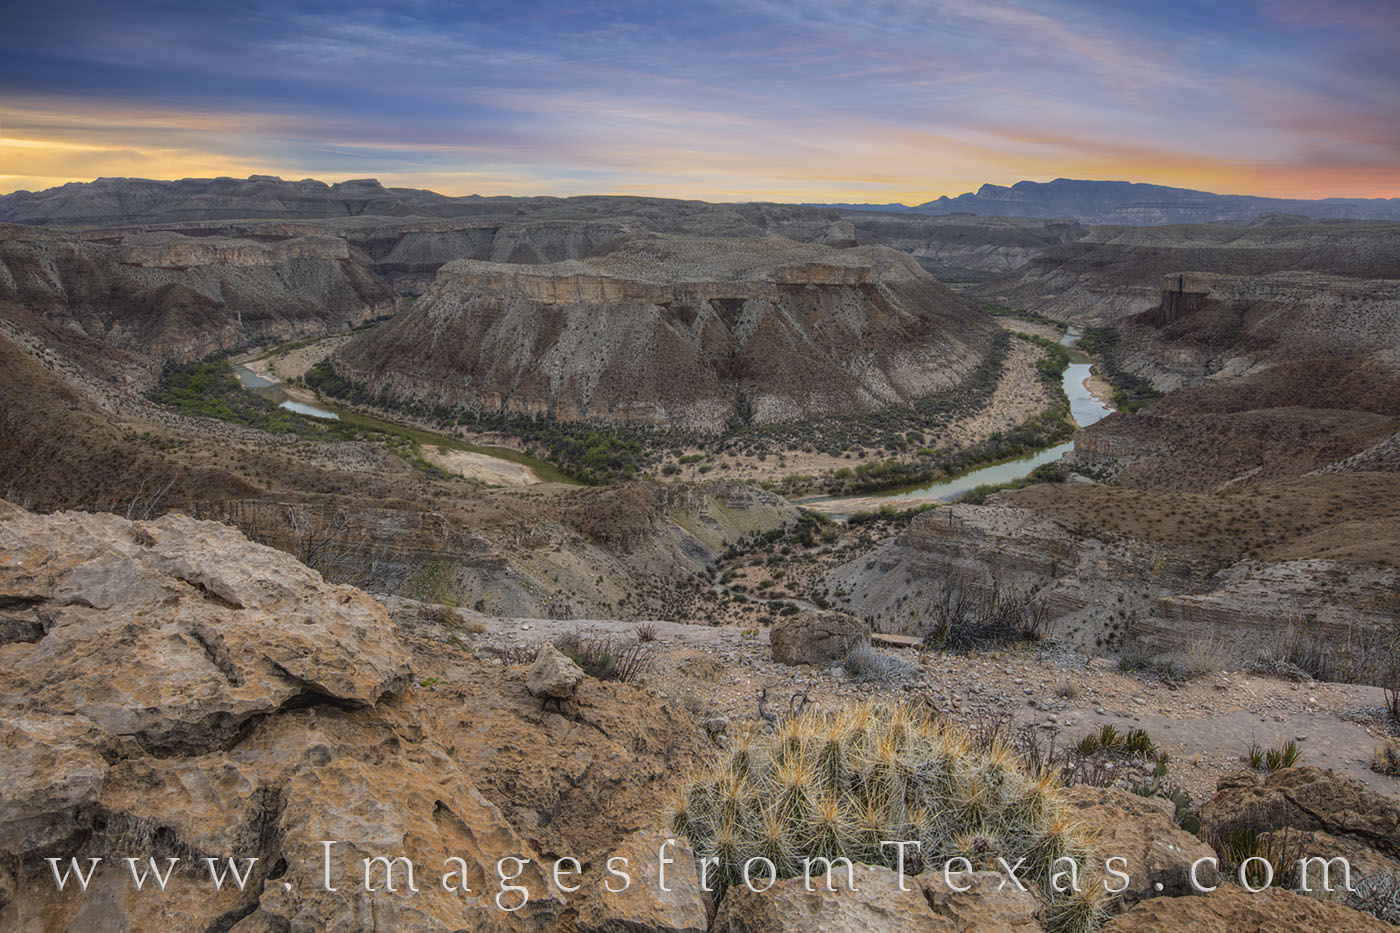 The view from Mesa de Anguila overlooking the Rio Grande is both amazing and remote. This portion of Big Bend National Park sees...